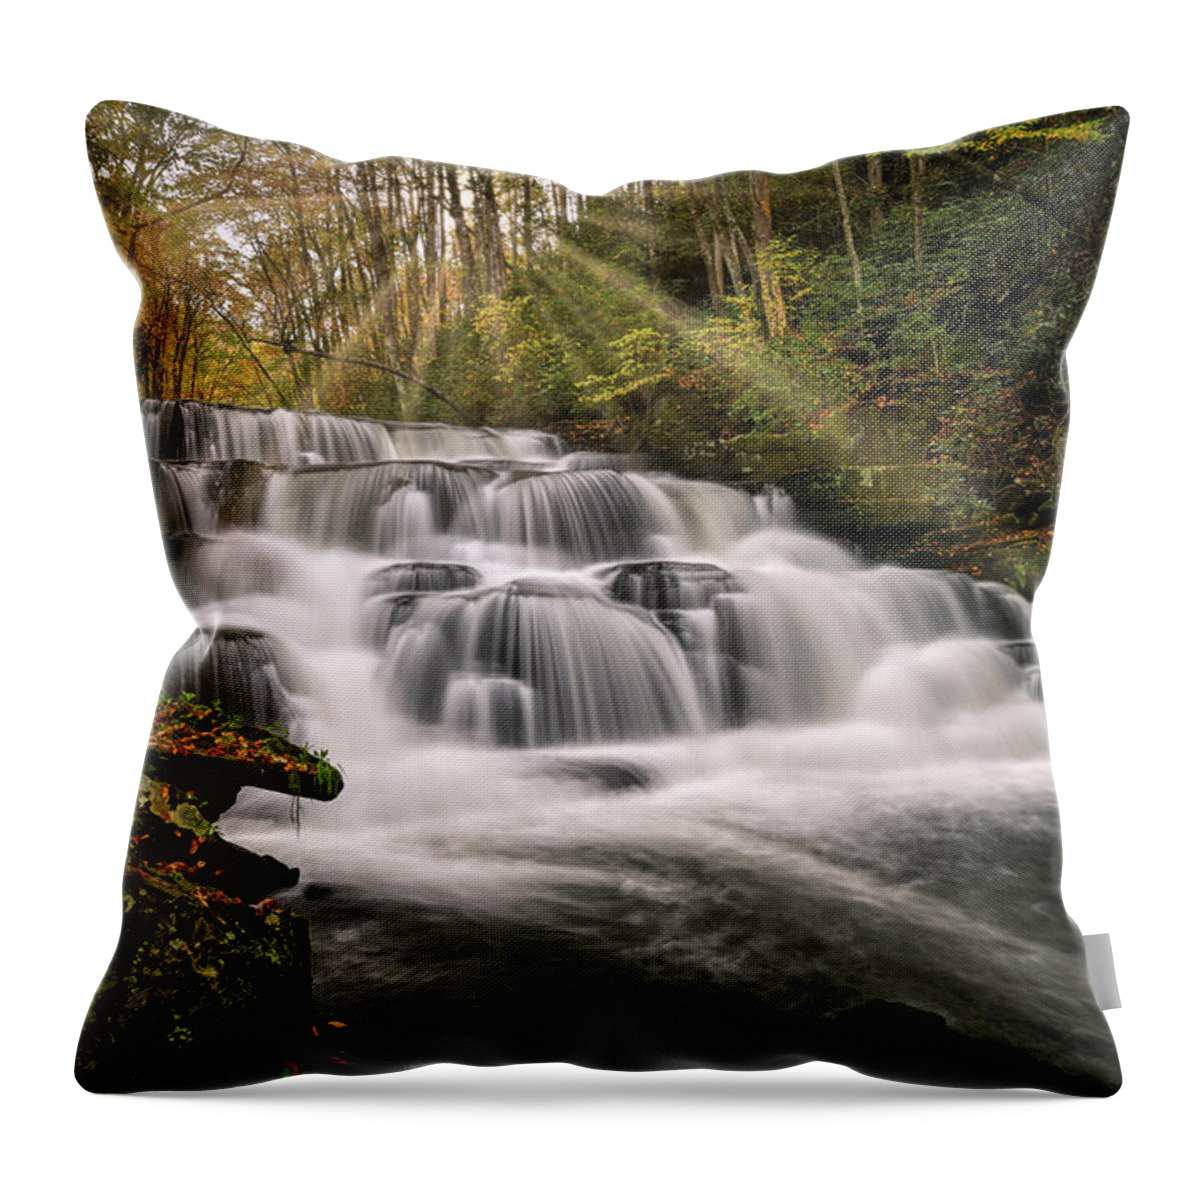 Waterfall Throw Pillow featuring the photograph Enchanted Forest by Eric Haggart